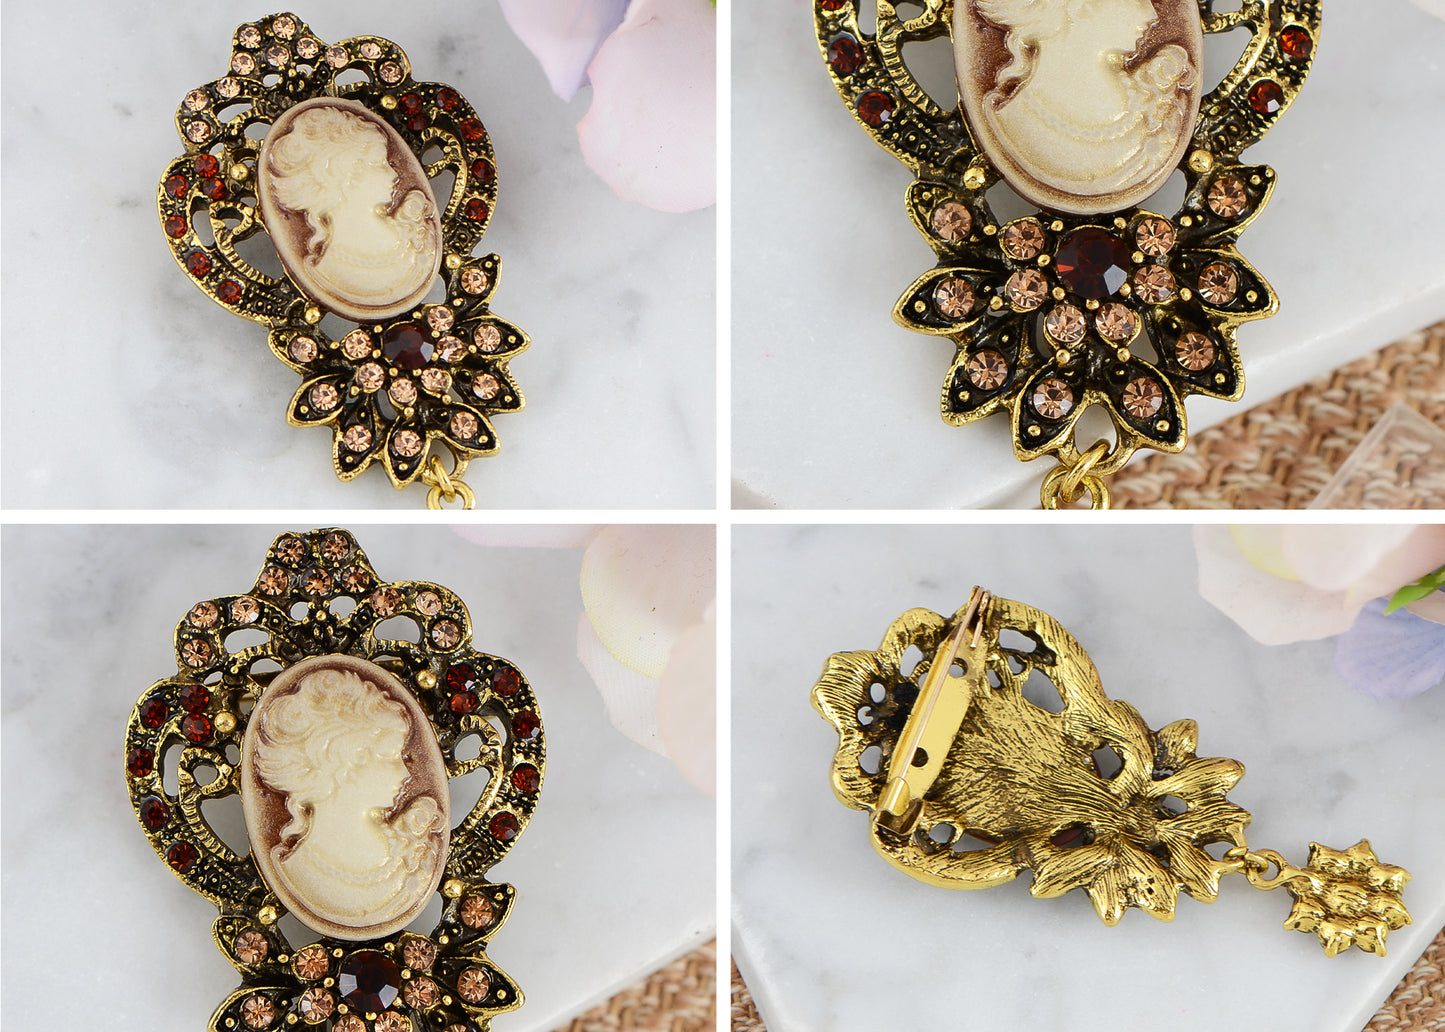 Alilang Vintage Inspired Crystal Rhinestone Victorian Lady Cameo Brooch Pin flower Pendant